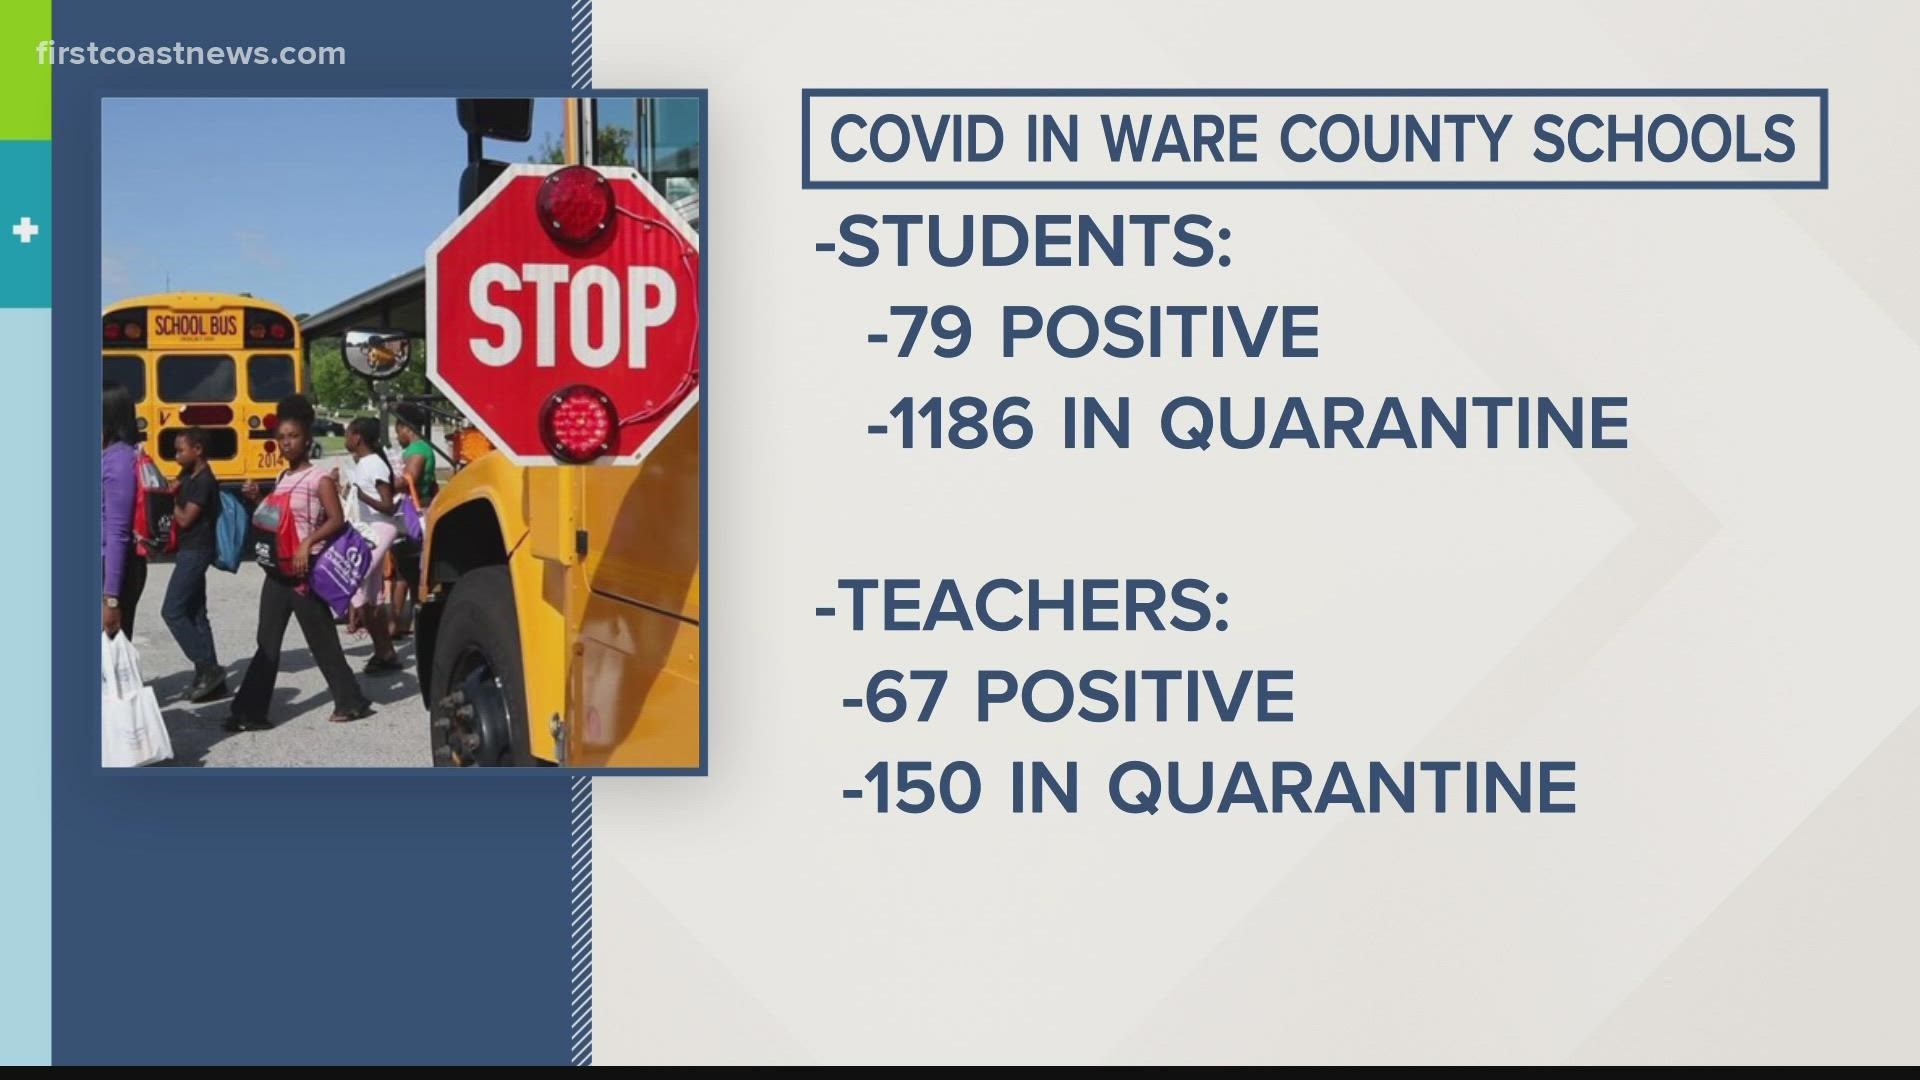 Two Southeast Georgia counties battling COVID outbreaks are closing offices and schools.